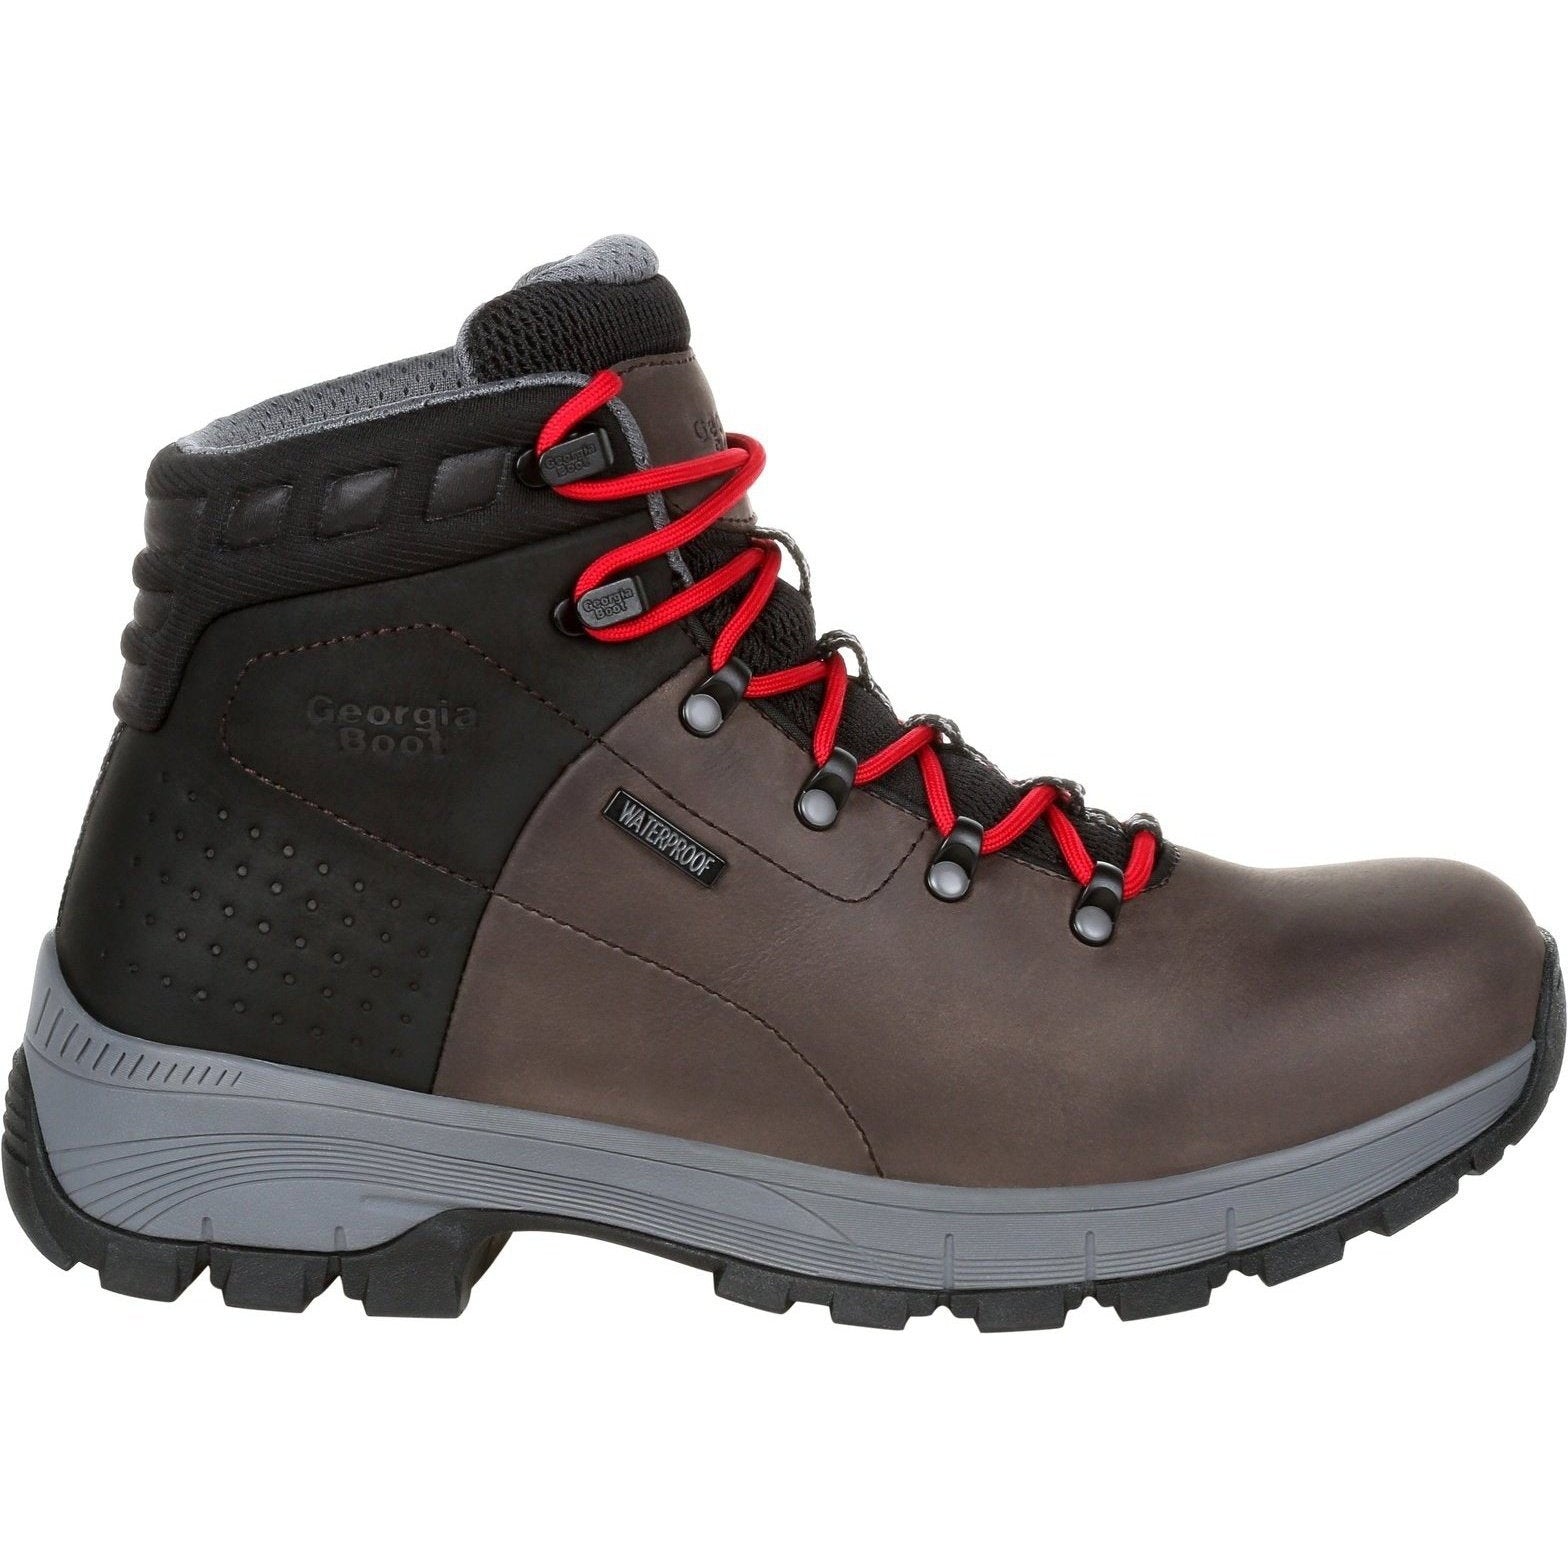 Georgia Men's Eagle Trail 6" Soft Toe WP Work Boot - Brown - GB00399  - Overlook Boots